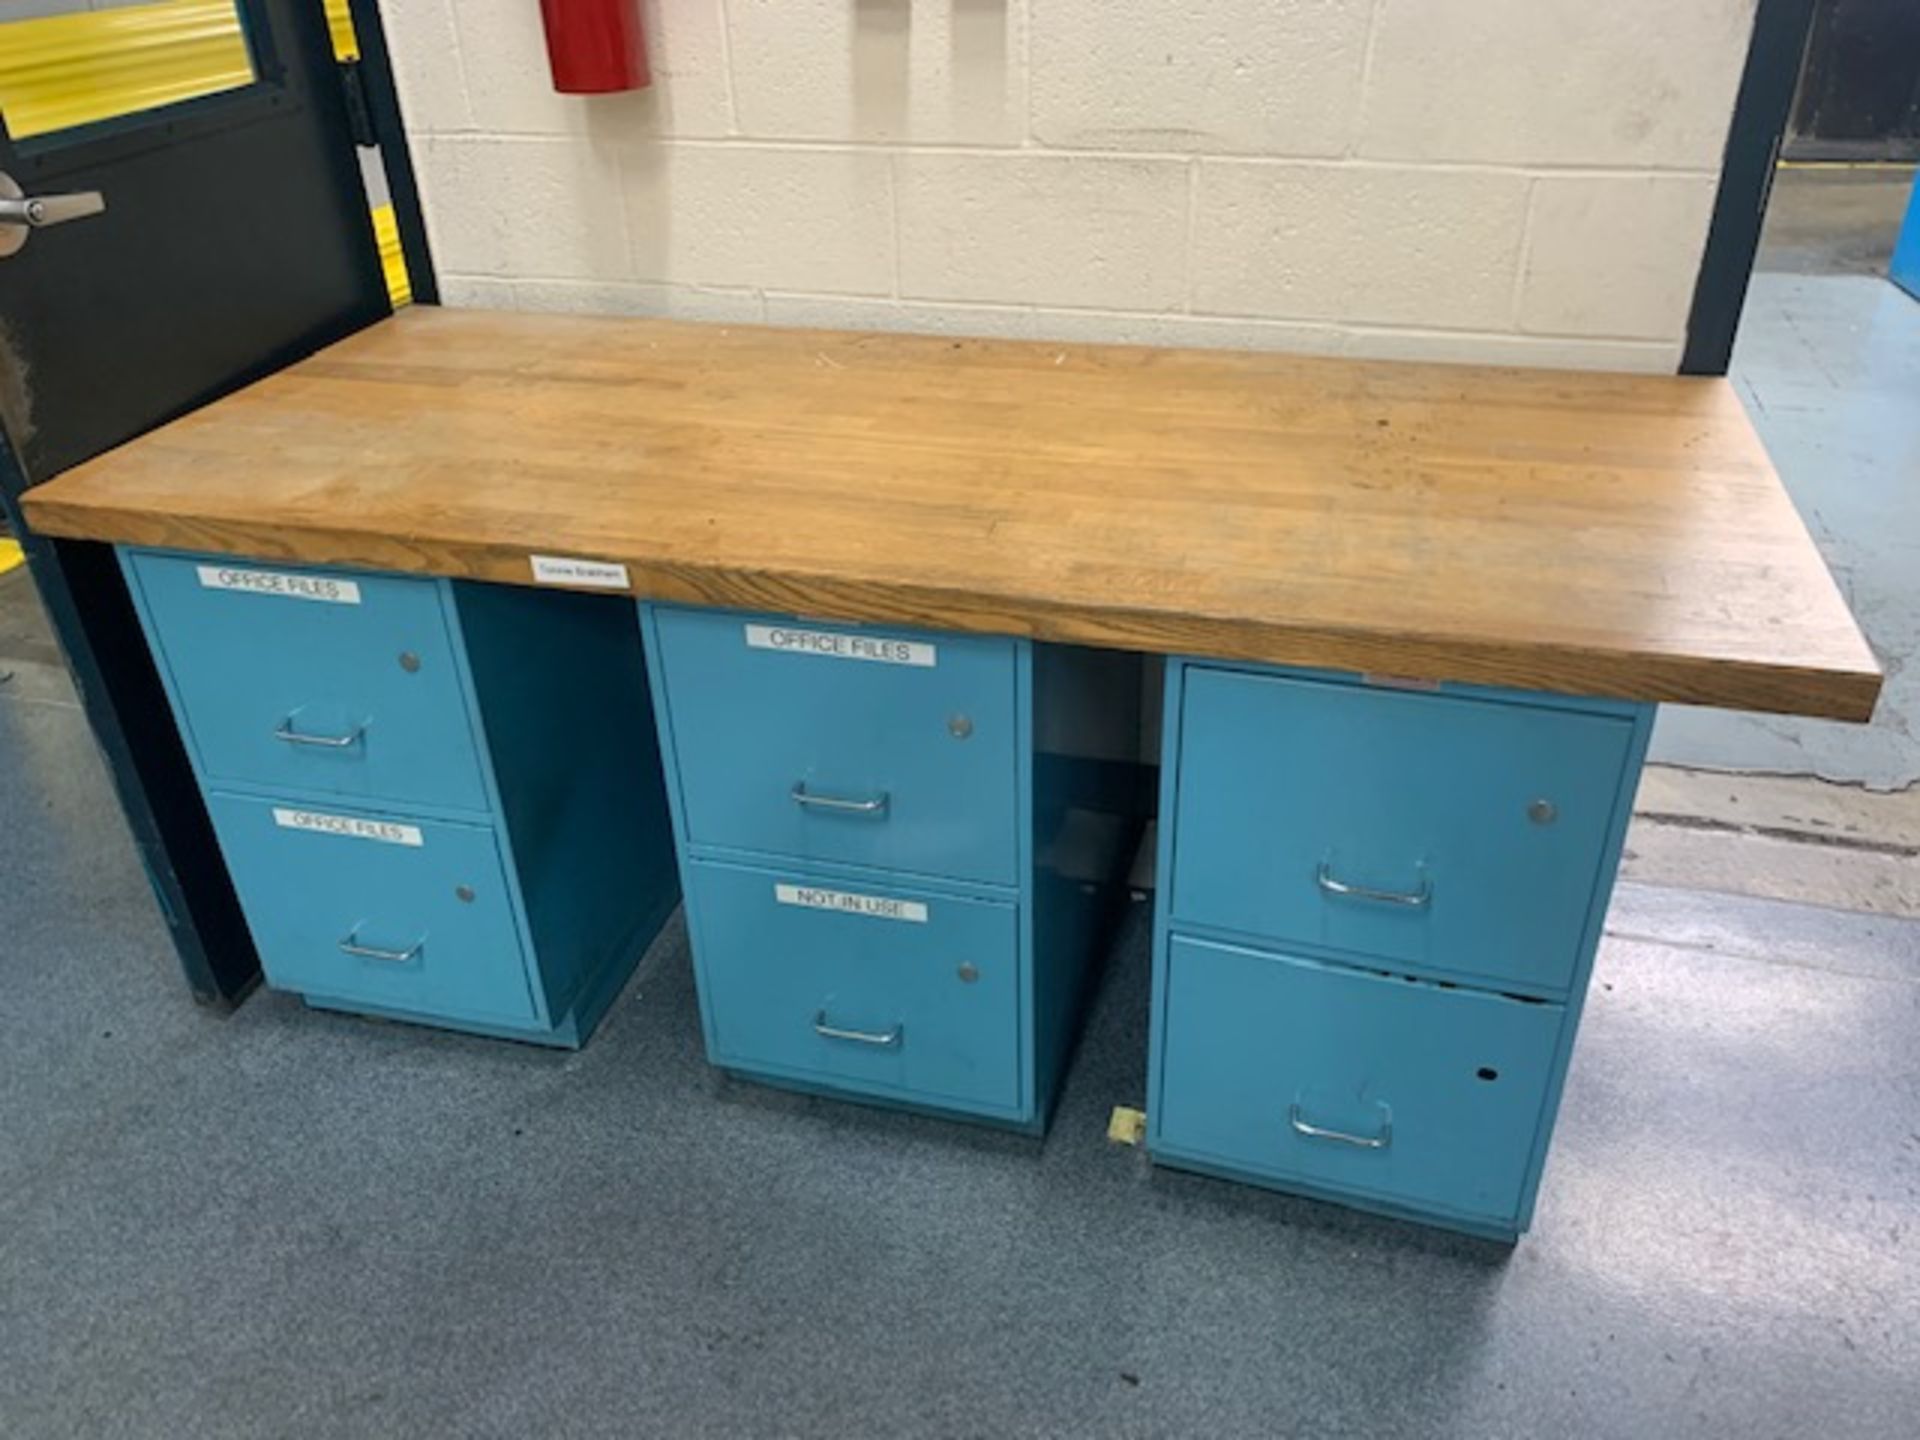 30" x 72" x 1-3/4" Oak Table Top sitting on 3 Workplace 2 Drawer Cabinets